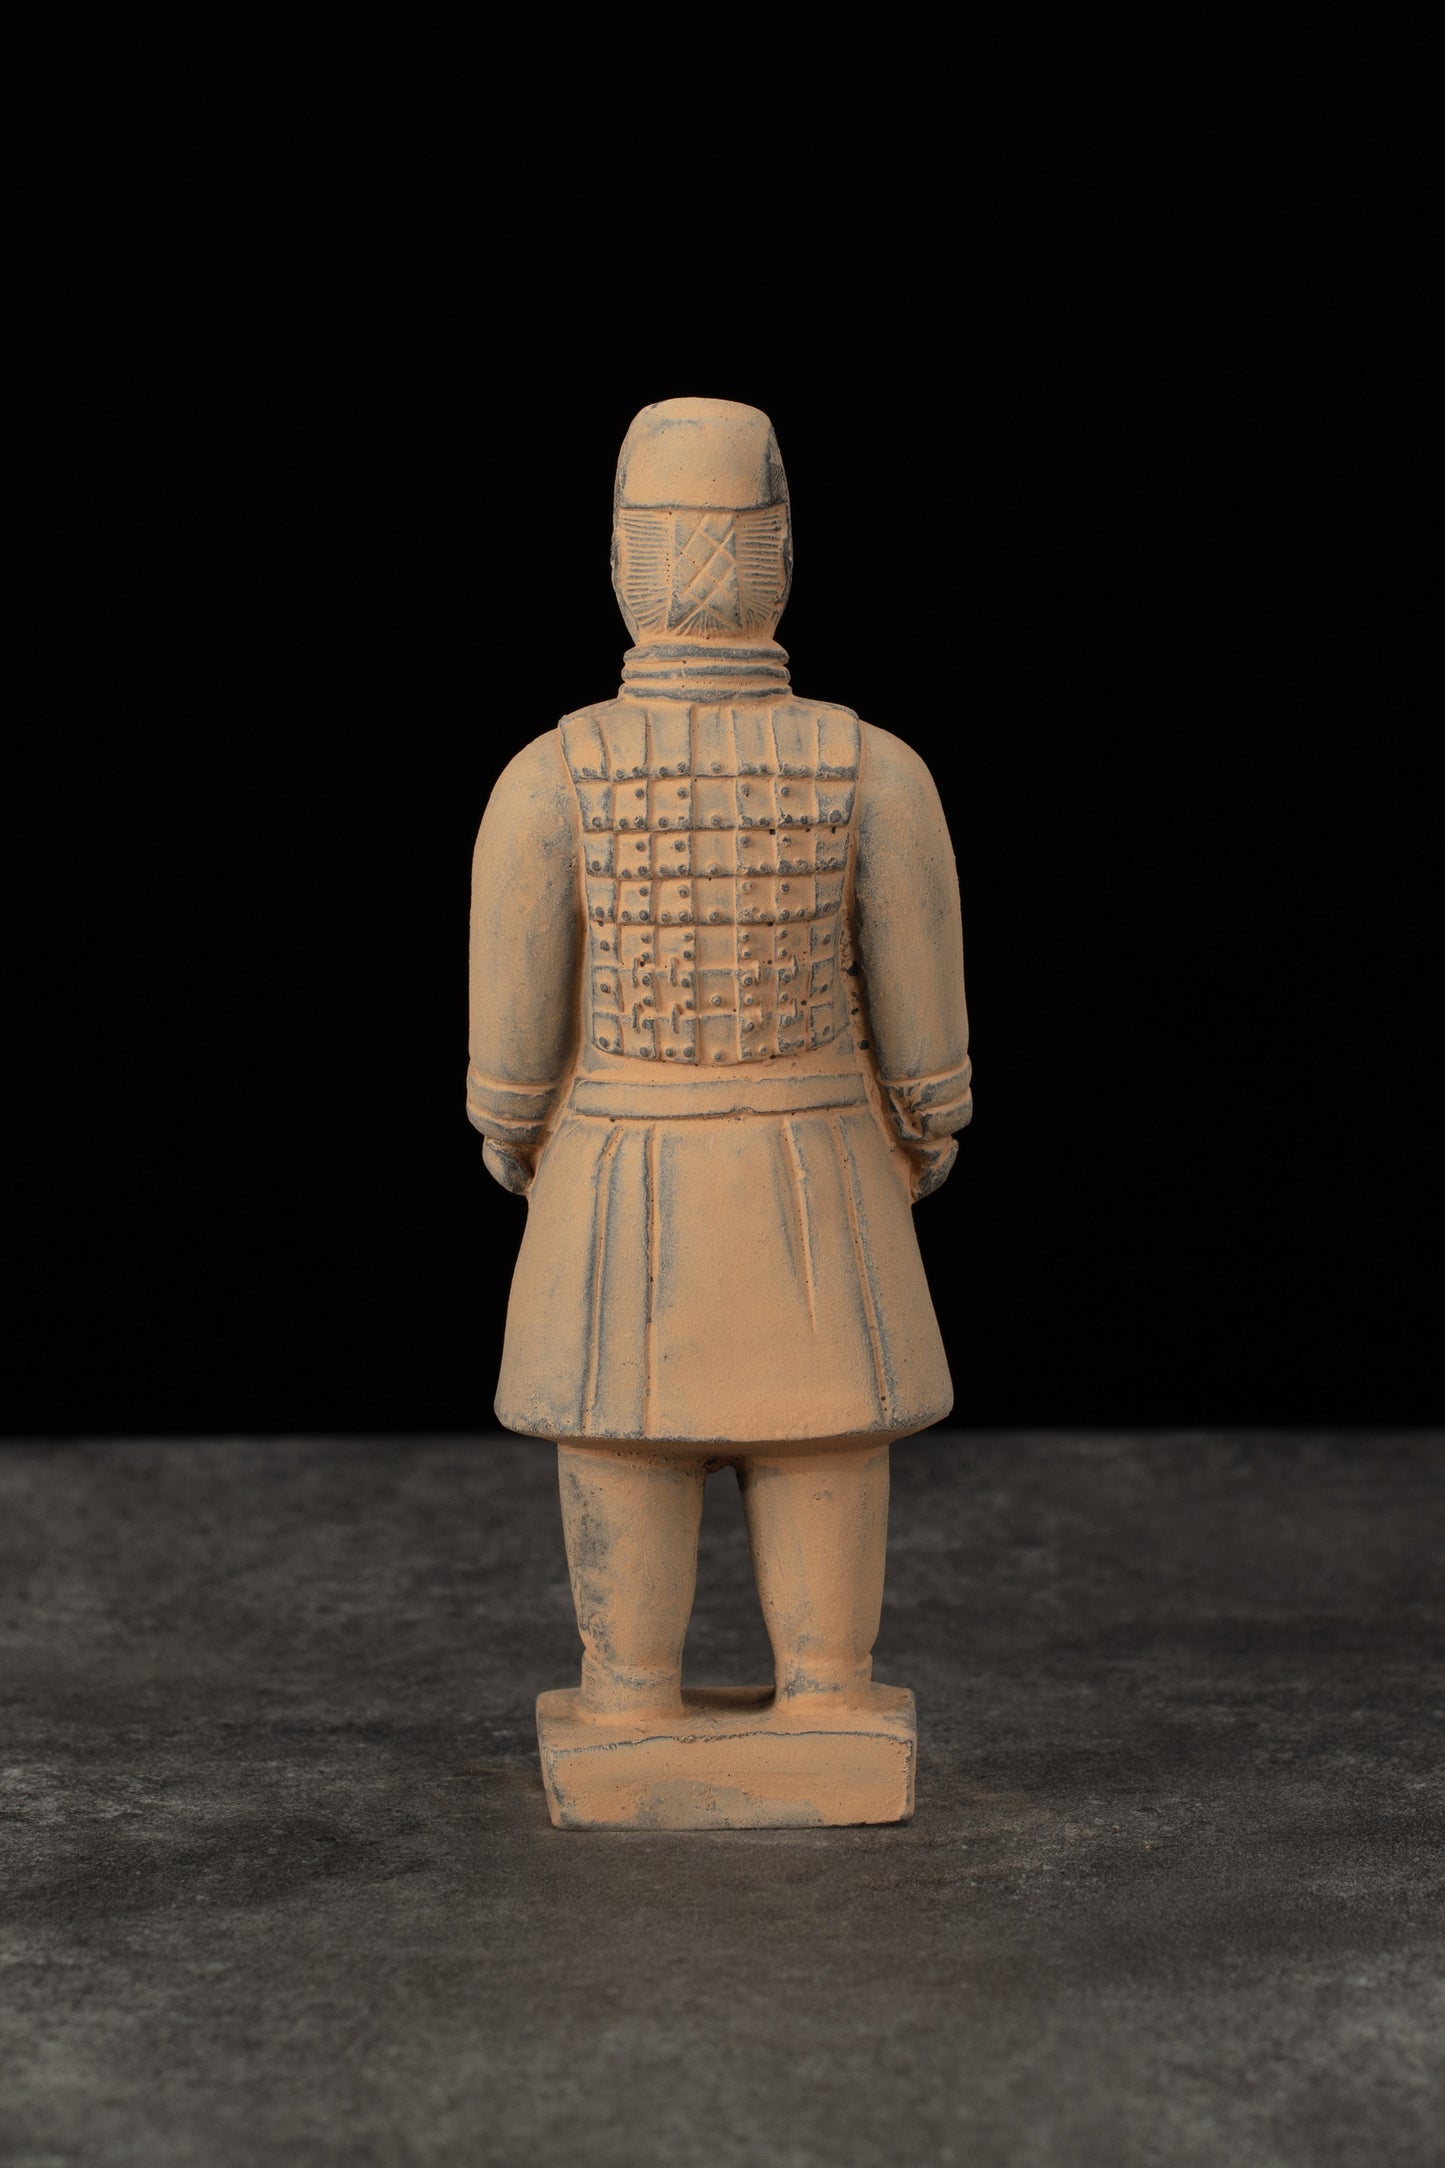 15CM Cavalryman - CLAYARMY-Dynamic back view of the 15CM Cavalryman replica, showcasing the finely crafted leather boots and the realistic depiction of the knee-length jacket.